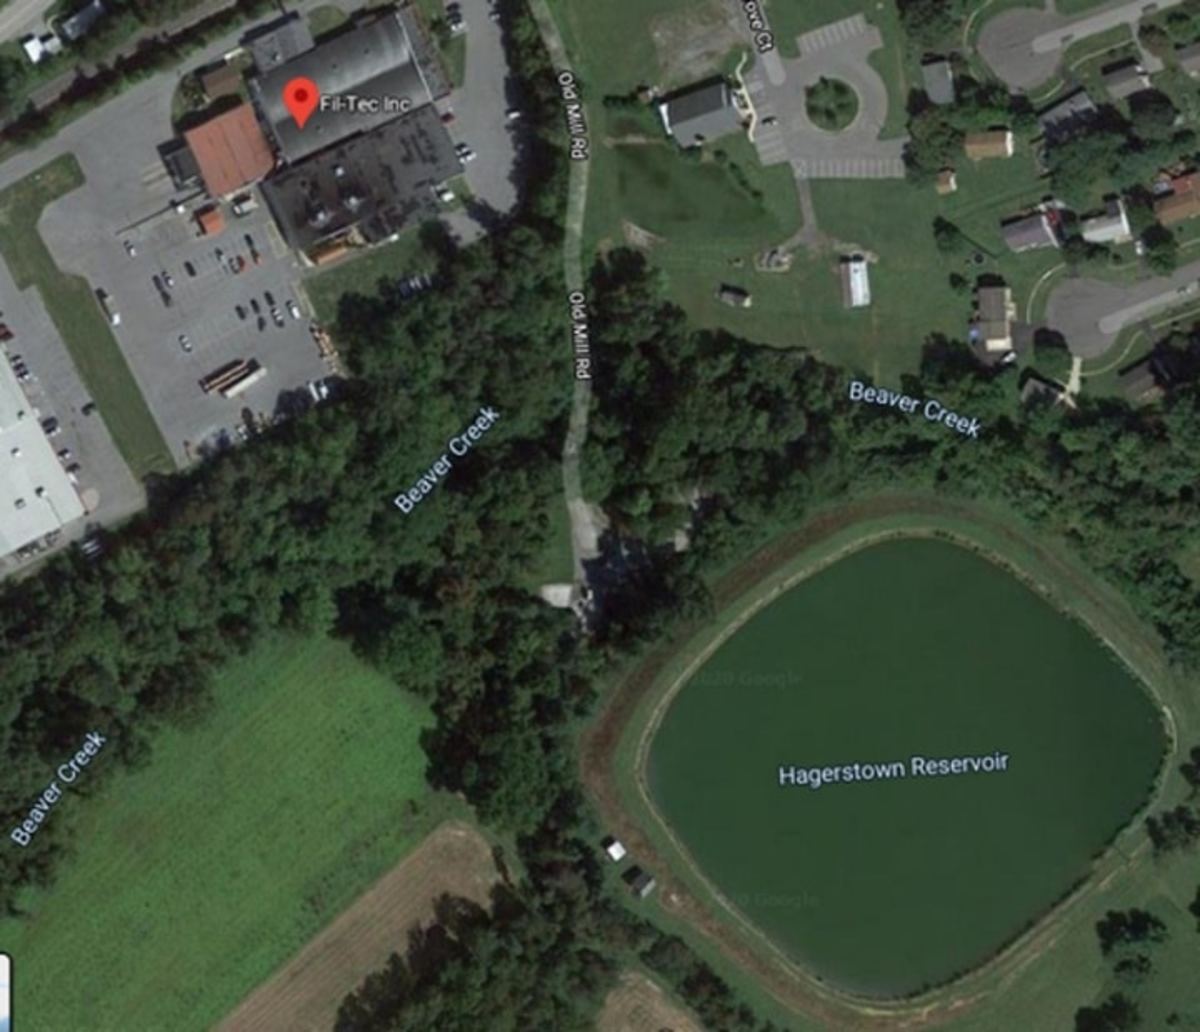 Fil-Tec, a manufacturer of products containing PFAS is located adjacent to Beaver Creek and the Hagerstown Reservoir.